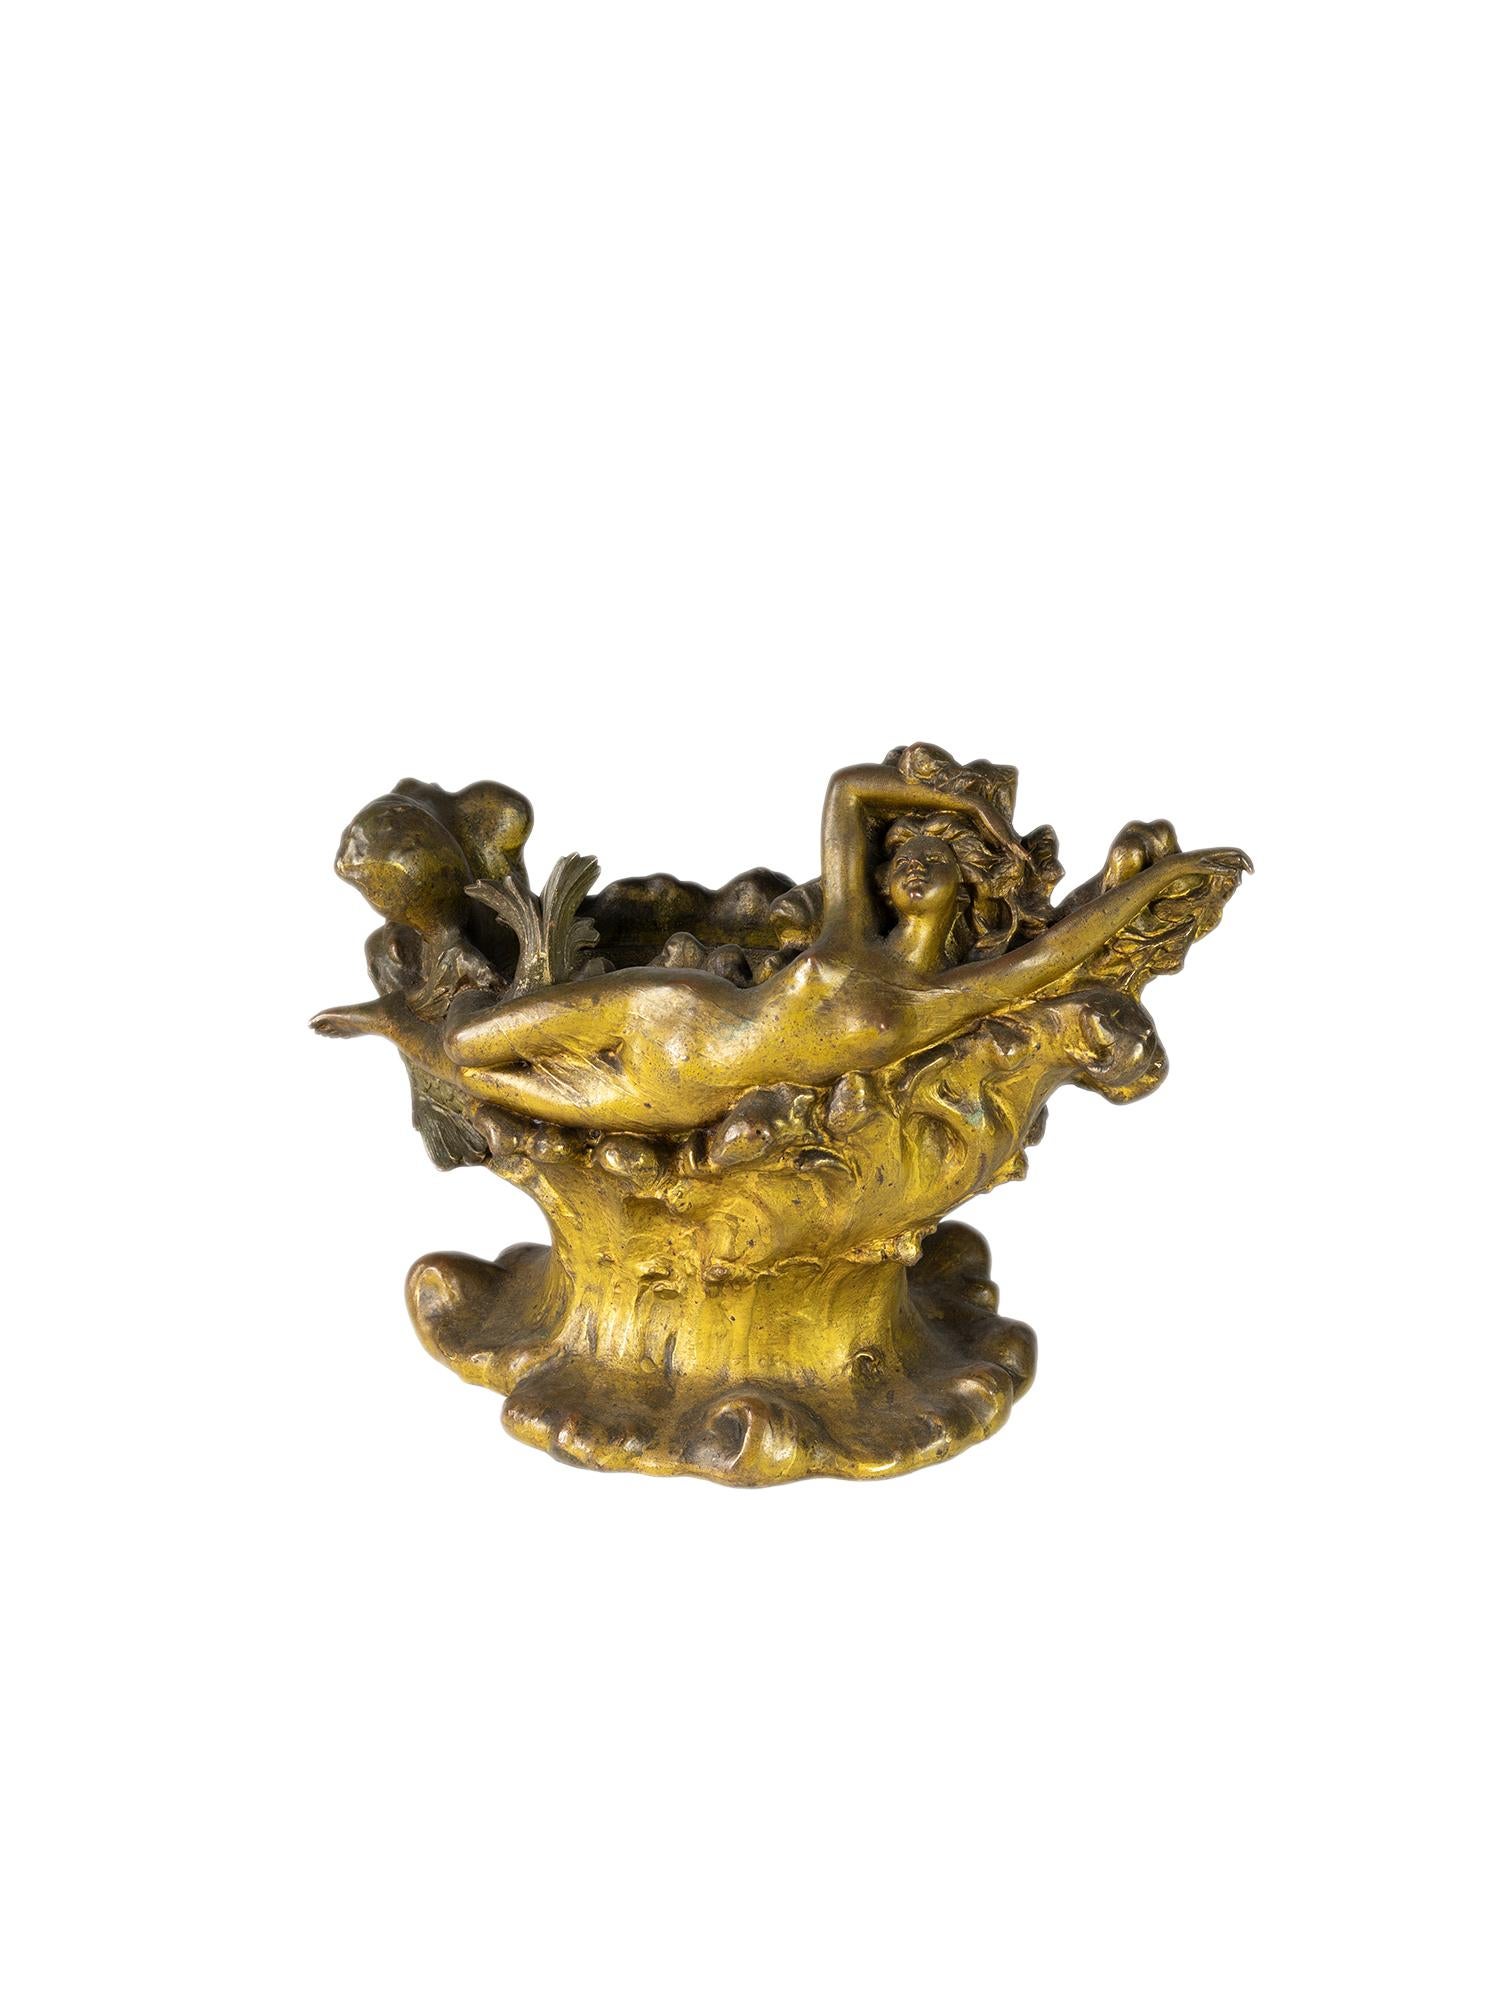 A very peculiar vase in gilded metal with a richly decorated lying woman figurine.
